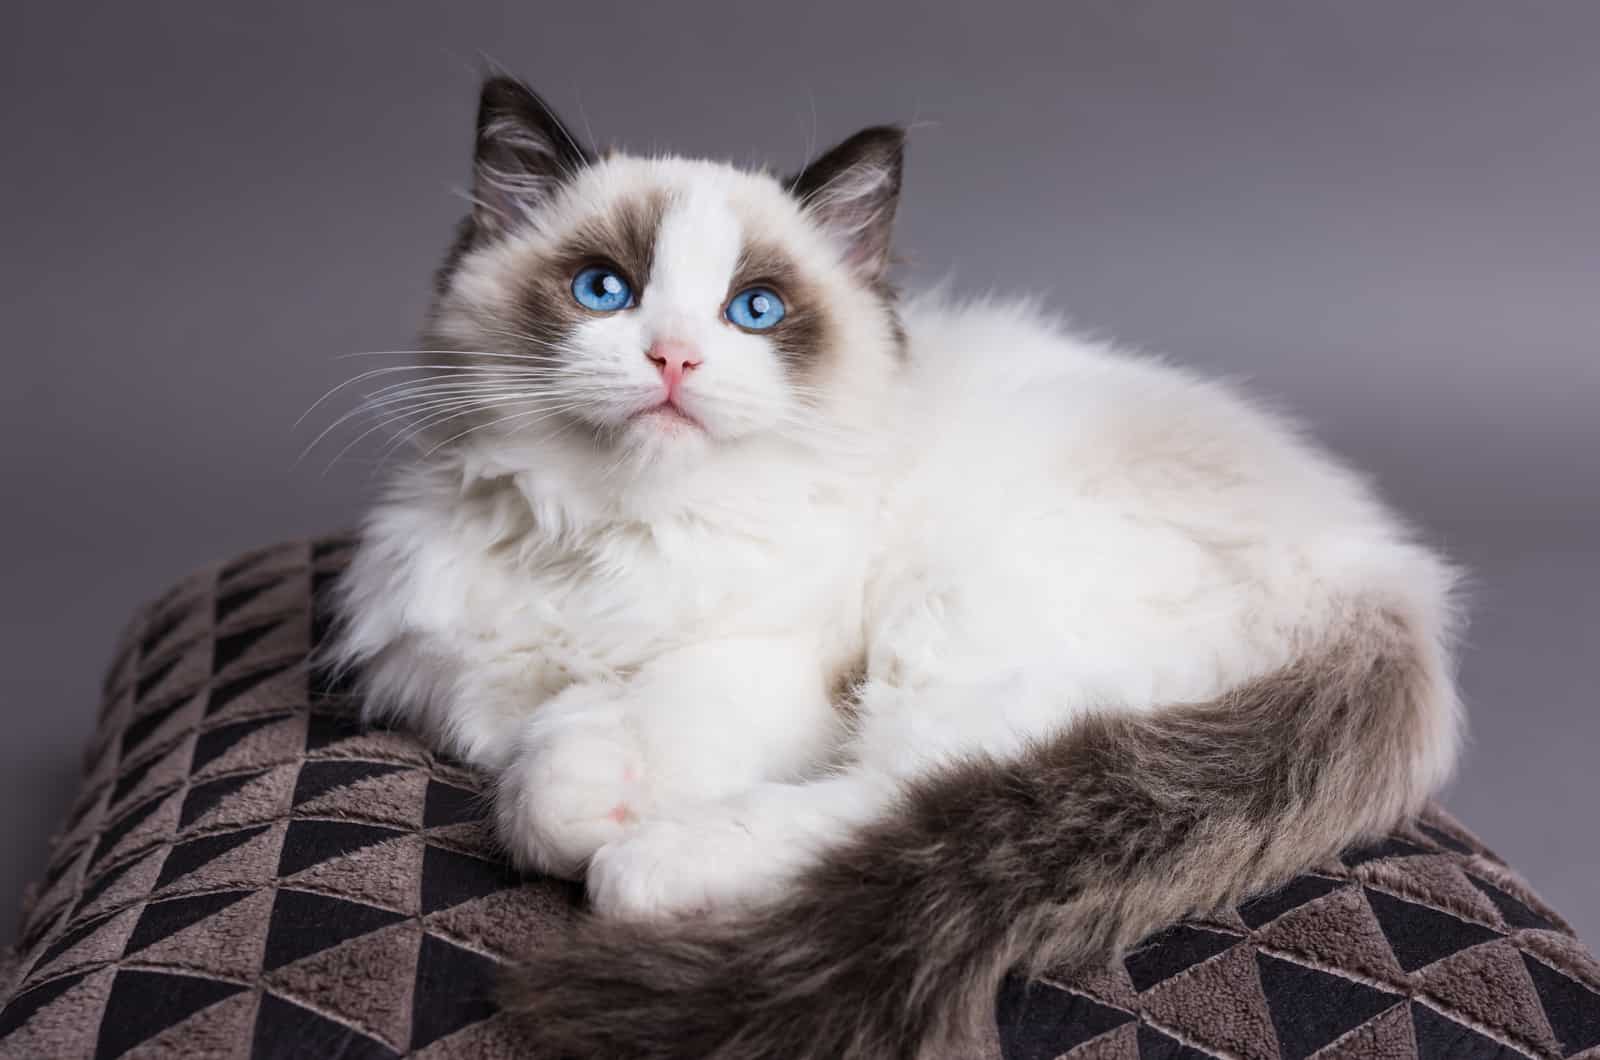 Ragdoll cat is lying down and looking at the camera